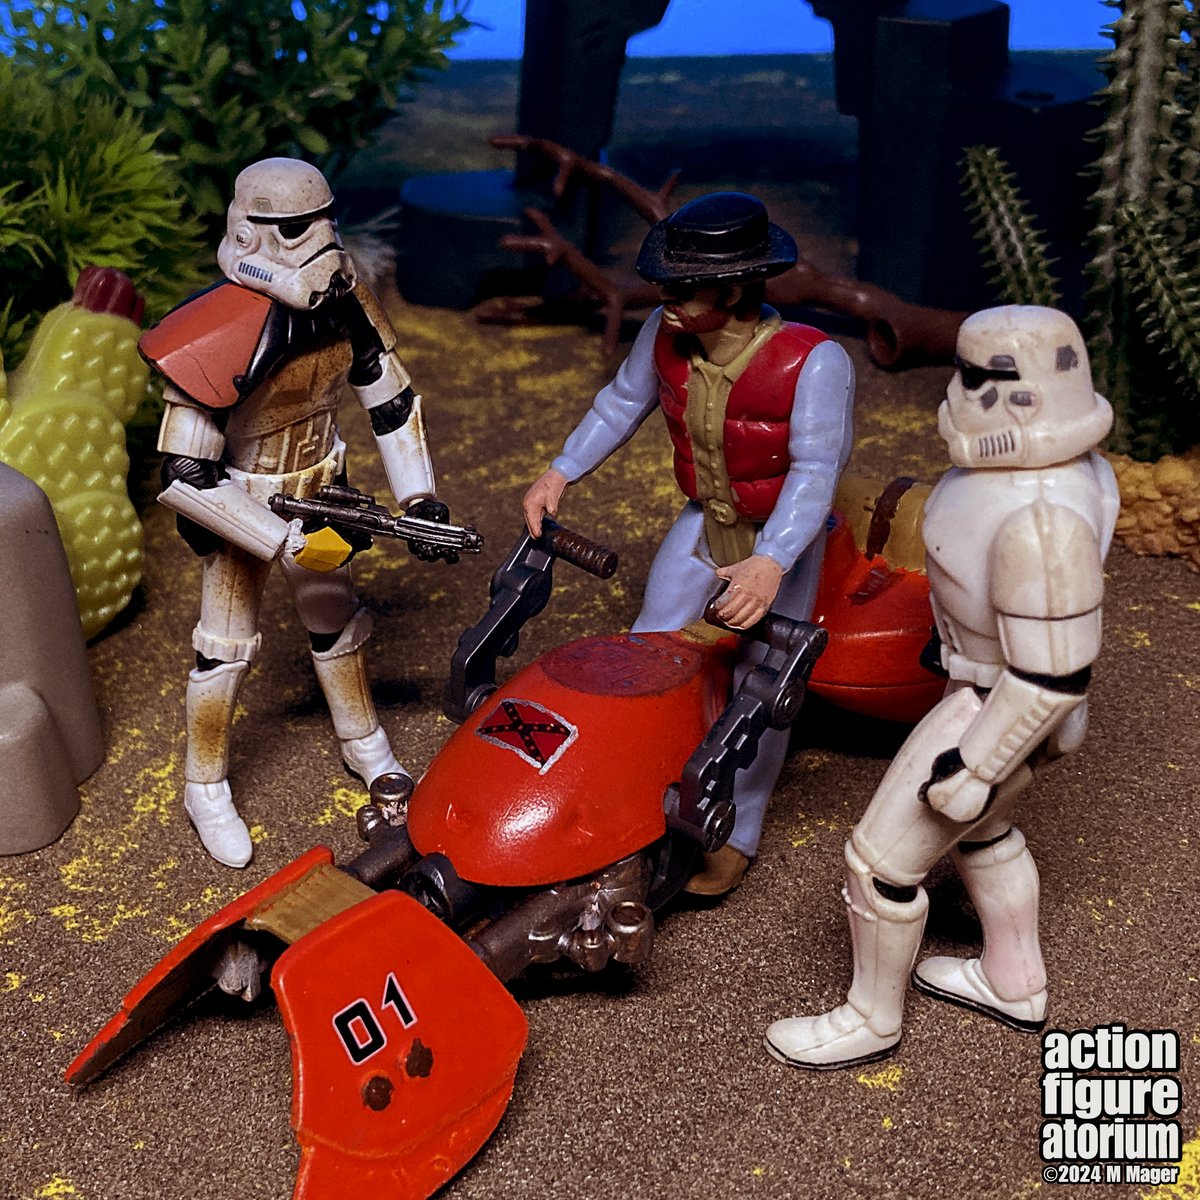 Waylon Jennings approaches OUTLAW COUNTRY
#starwarscustoms #speederbike #generallee #repaint #outlawcountry #dukesofhazzard #sandtroopers #oldwest #desertscene
#toyphotography #toycollector #toycollection #custom #diorama  #toys #customtoys #actionfigures #actionfigurephotography